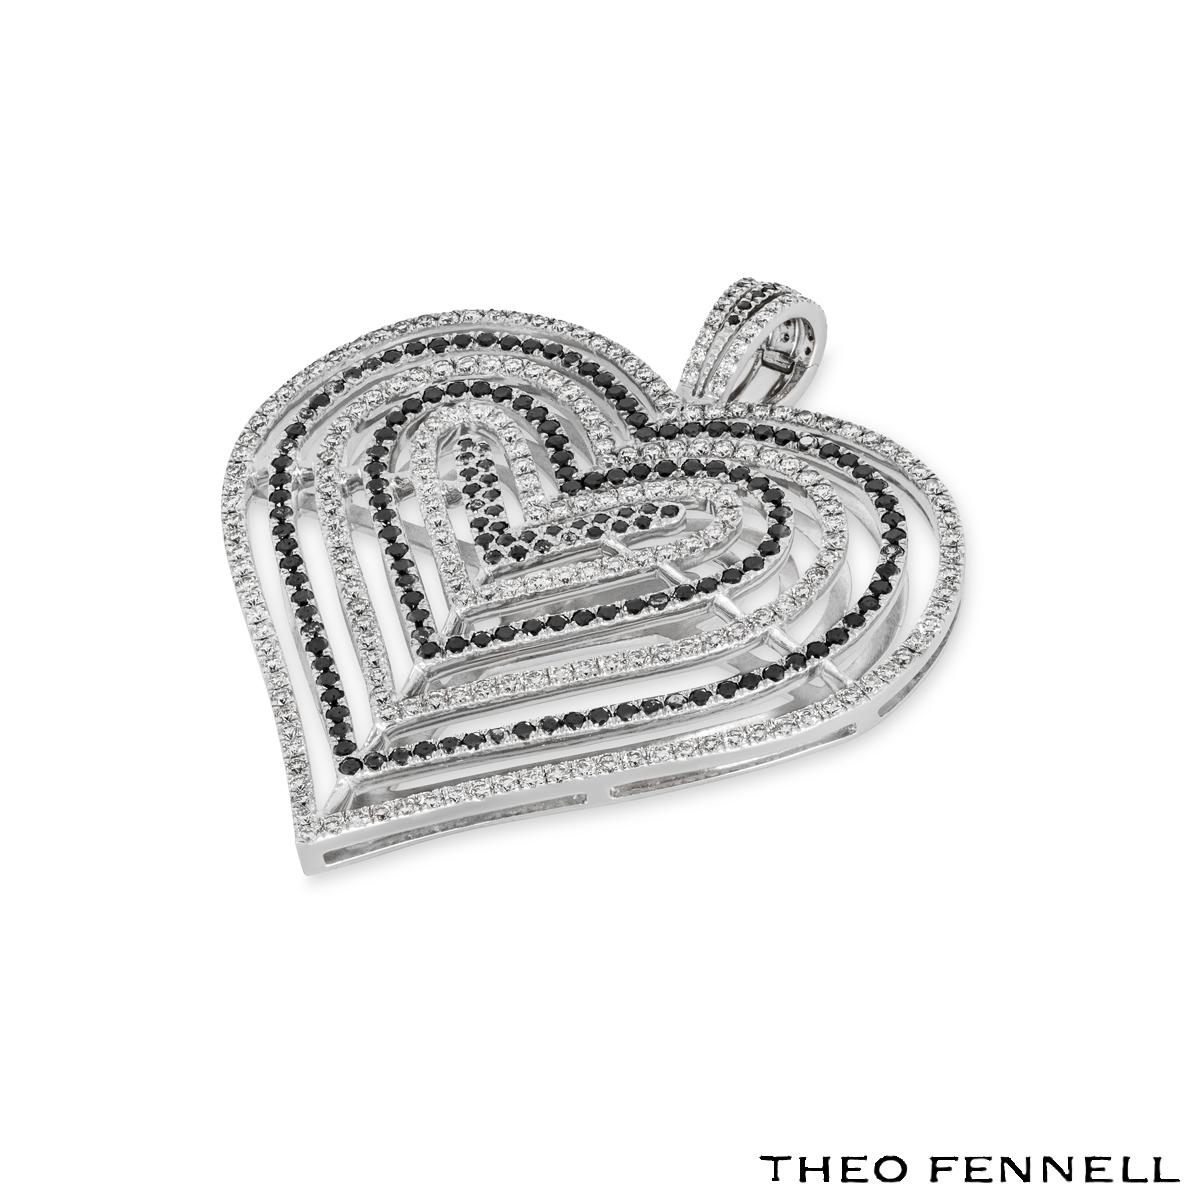 A striking 18k white gold Theo Fennell diamond pendant. The pendant comprises of an open work design with 6 hearts. Each heart has round brilliant cut diamonds in a pave setting alternating with black diamonds and white diamonds. There are 160 black